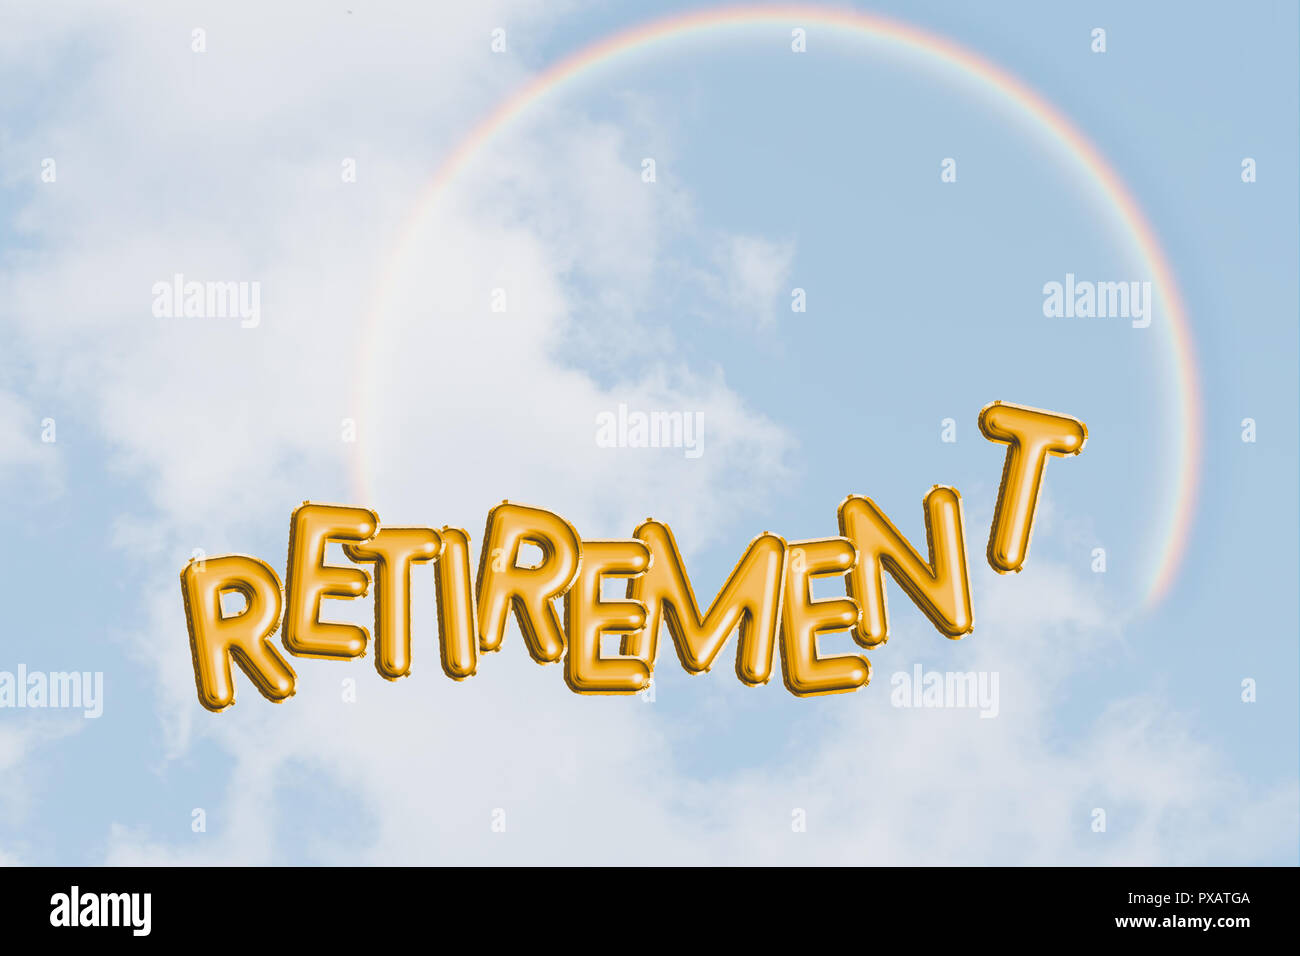 Happy retirement concept, blue sky, rainbow. Freedom, dreams and hopes with text word. Bright optimistic future. Stock Photo